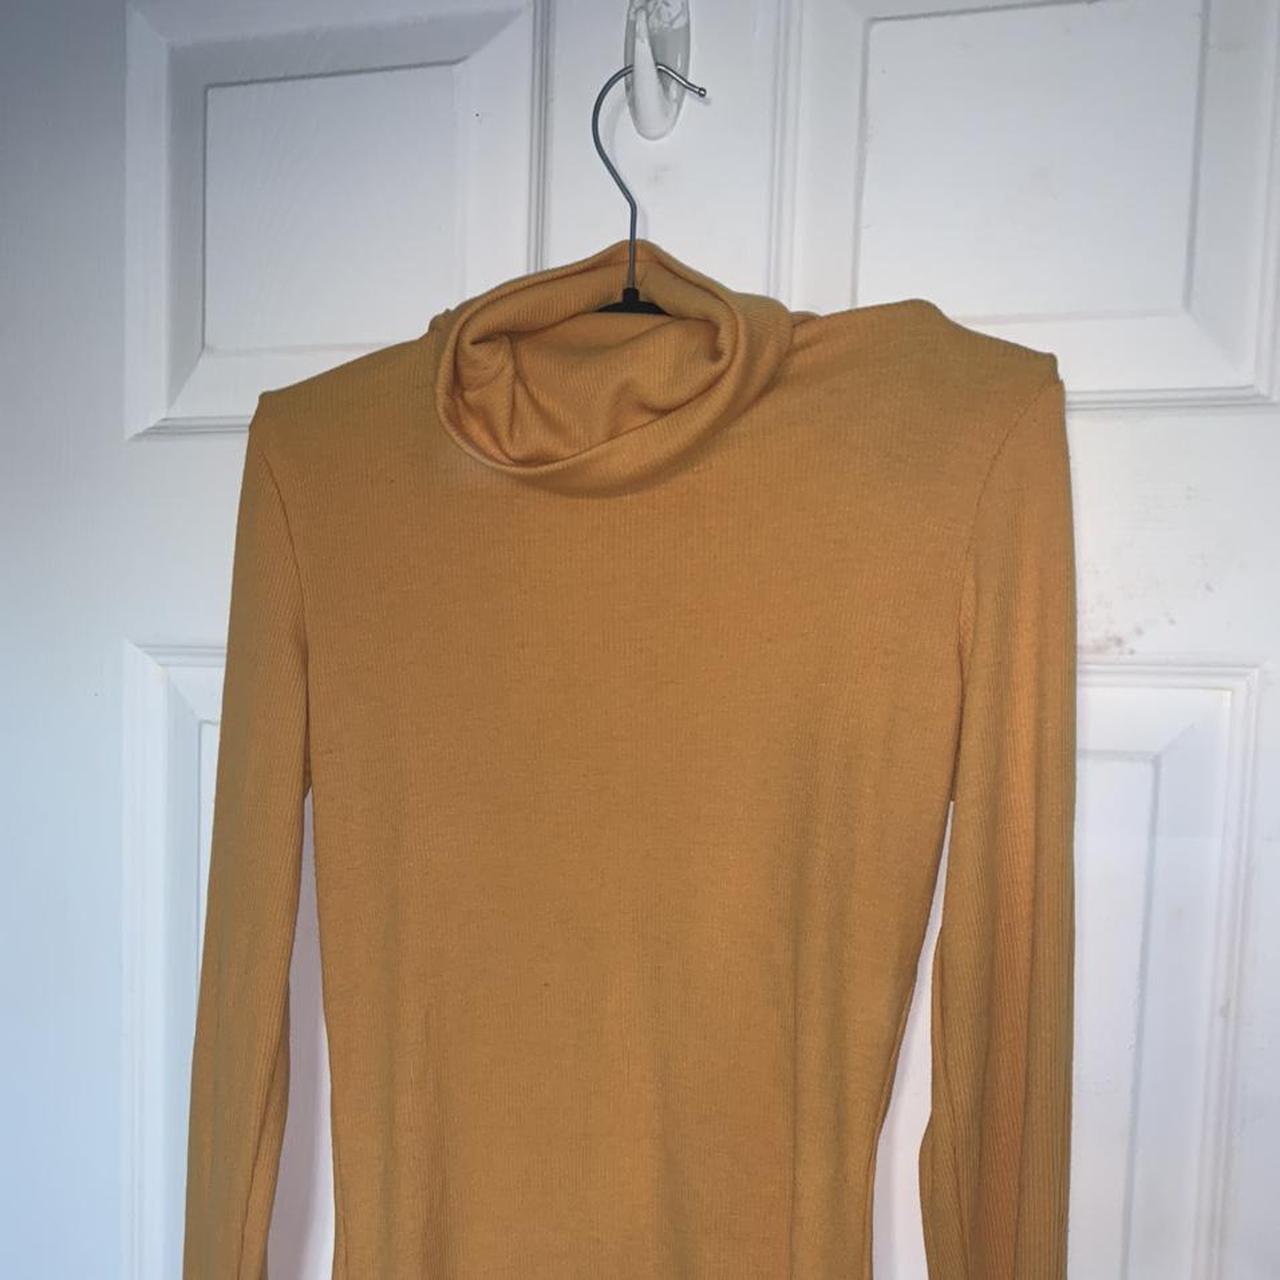 Product Image 3 - Mustard turtle neck ribbed T-shirt🍂
Brand